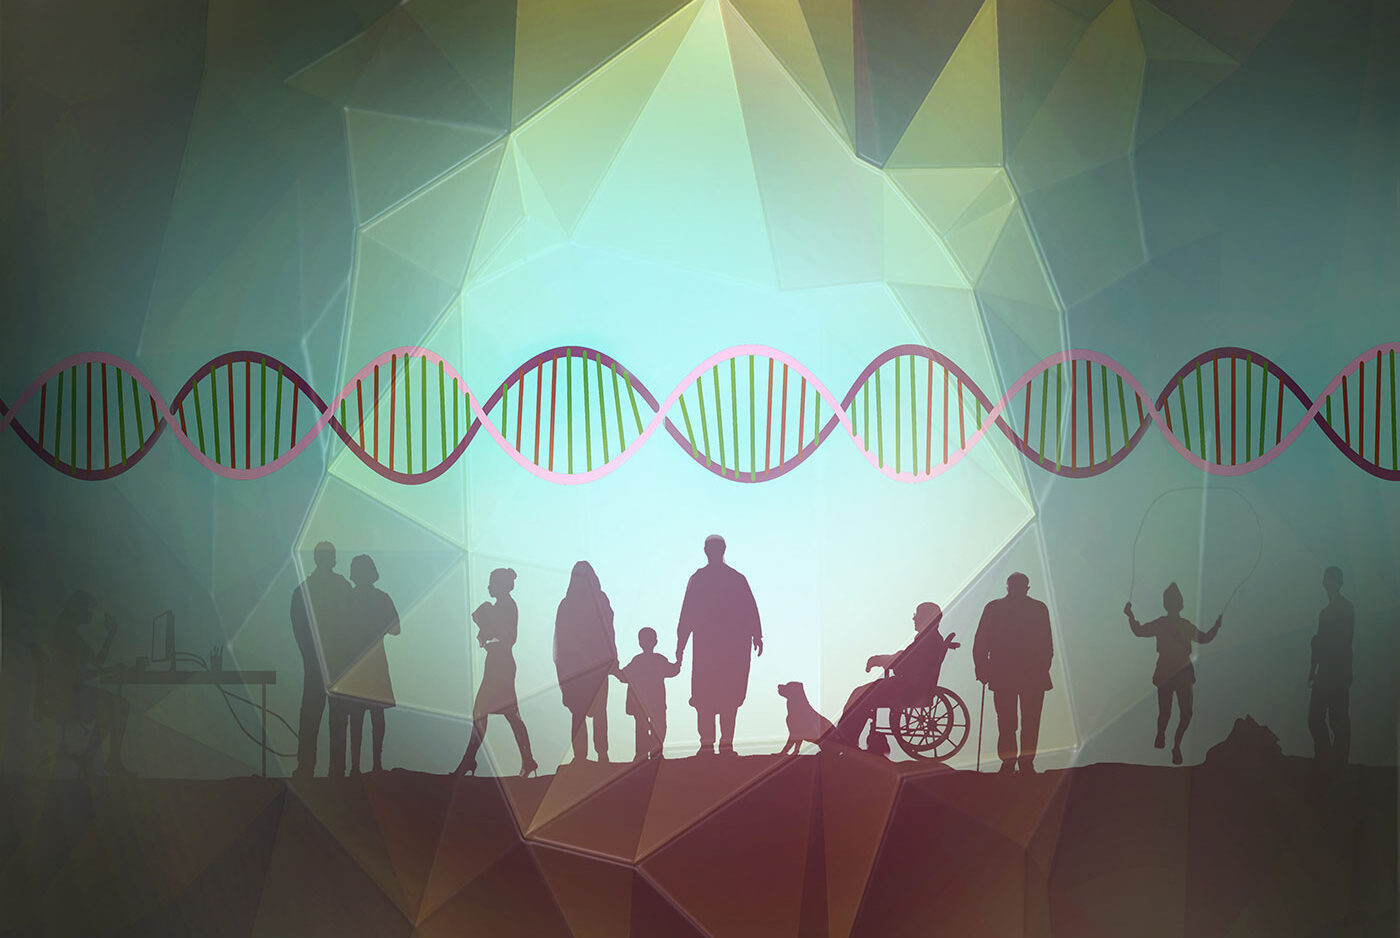 Concept image of a diverse group of people silhouetted against an abstract background with a double helix depicting genetic research and chromosomes